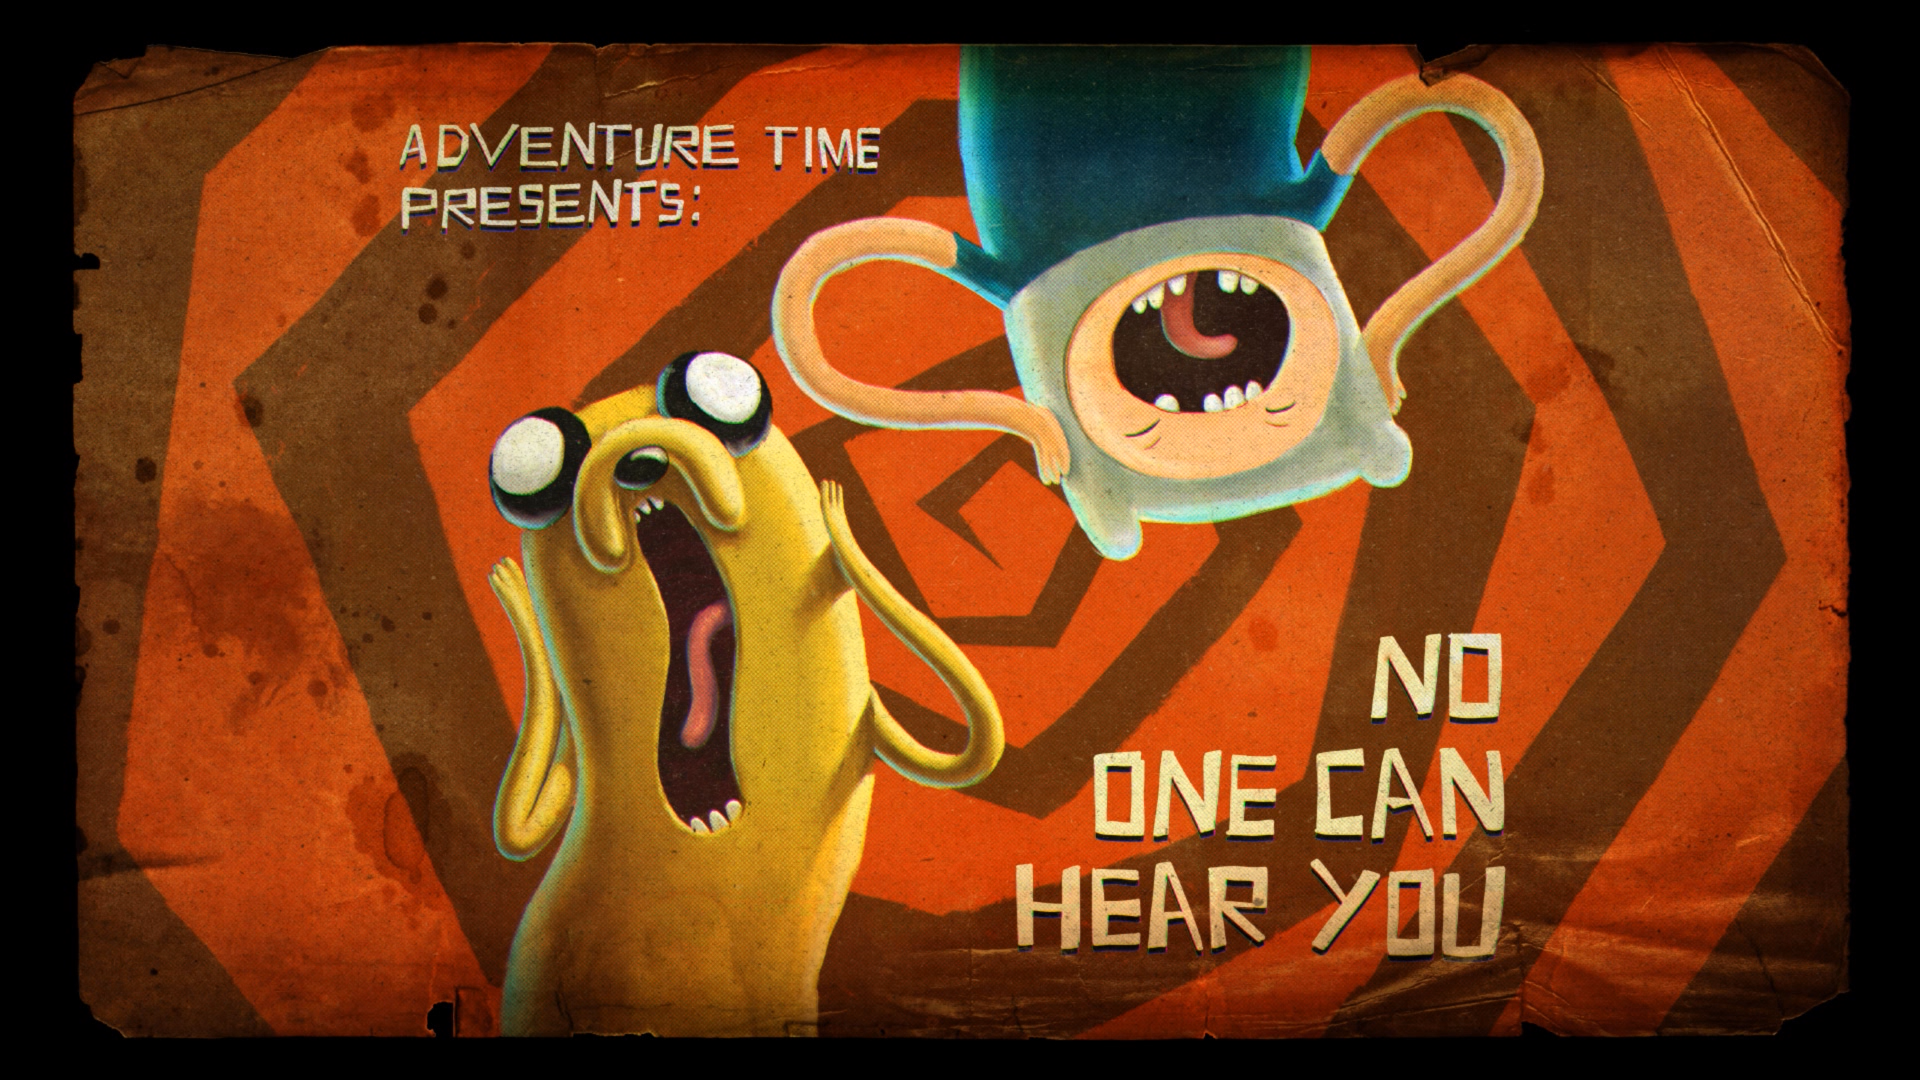 Adventure Time No One Can Hear You (TV Episode 2011) - IMDb